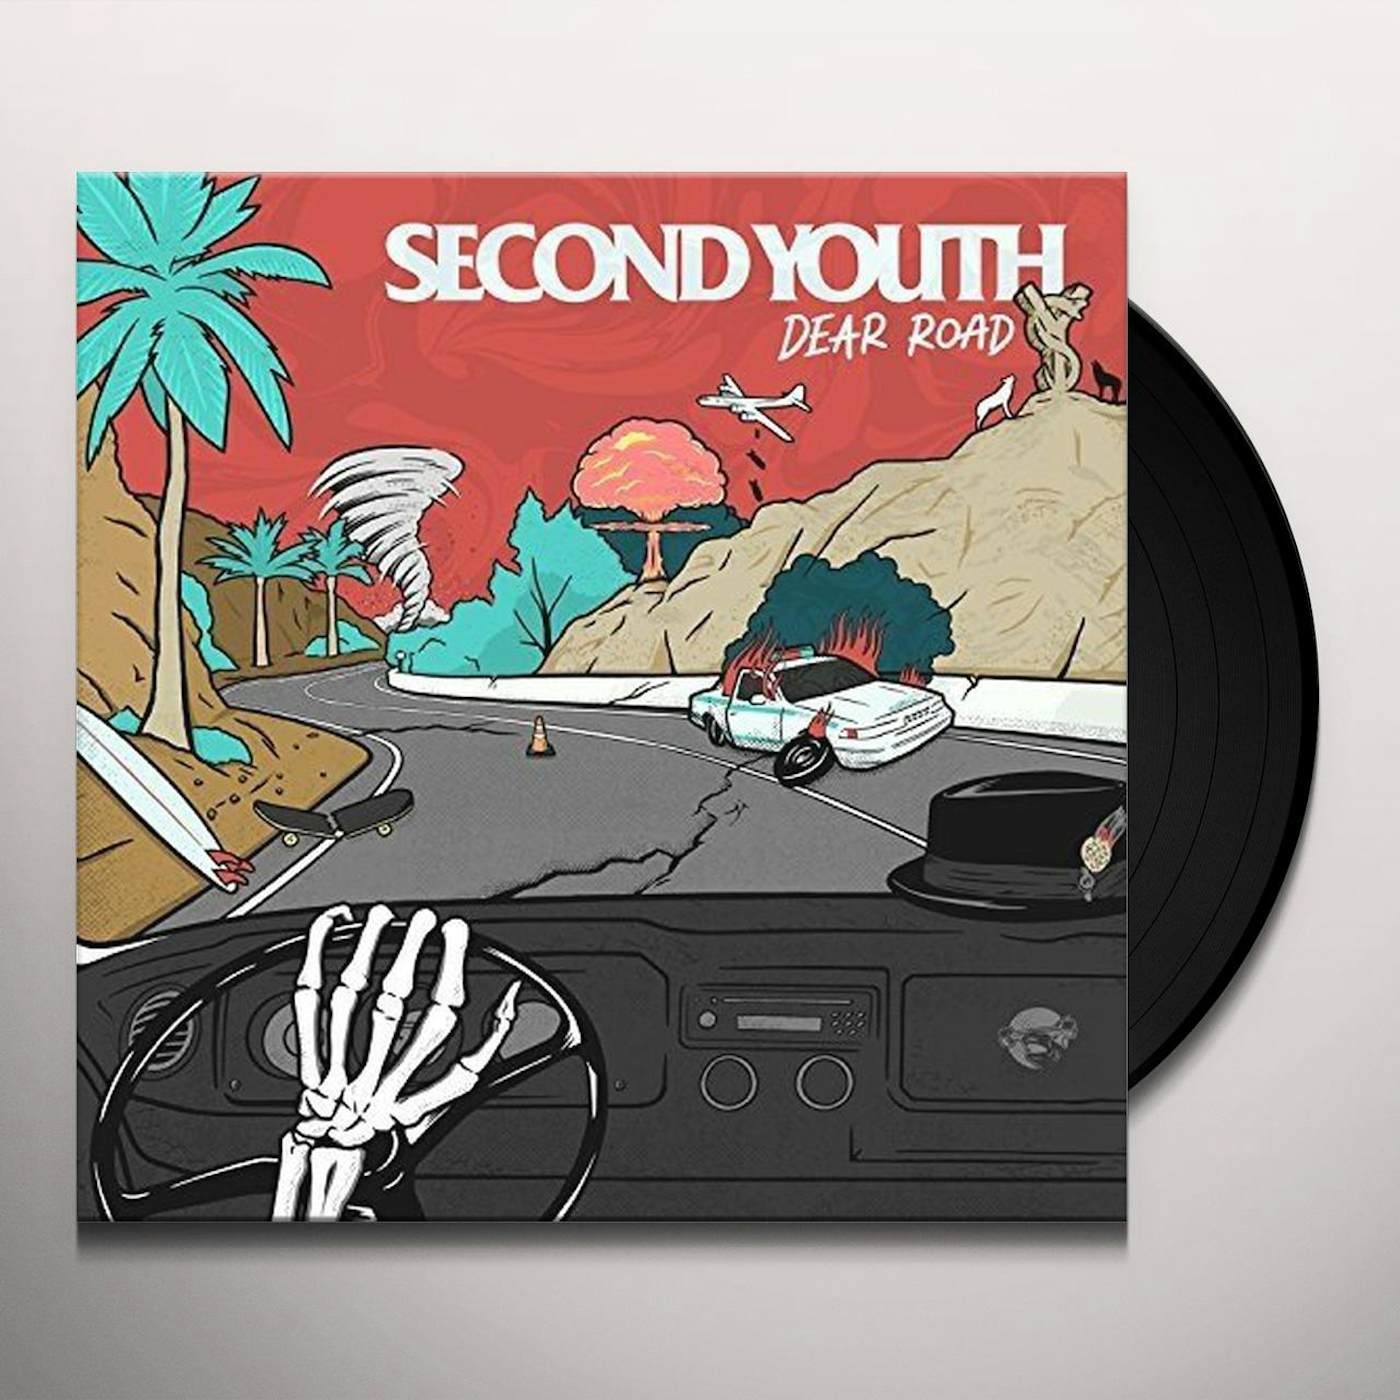 Second Youth Dear Road Vinyl Record